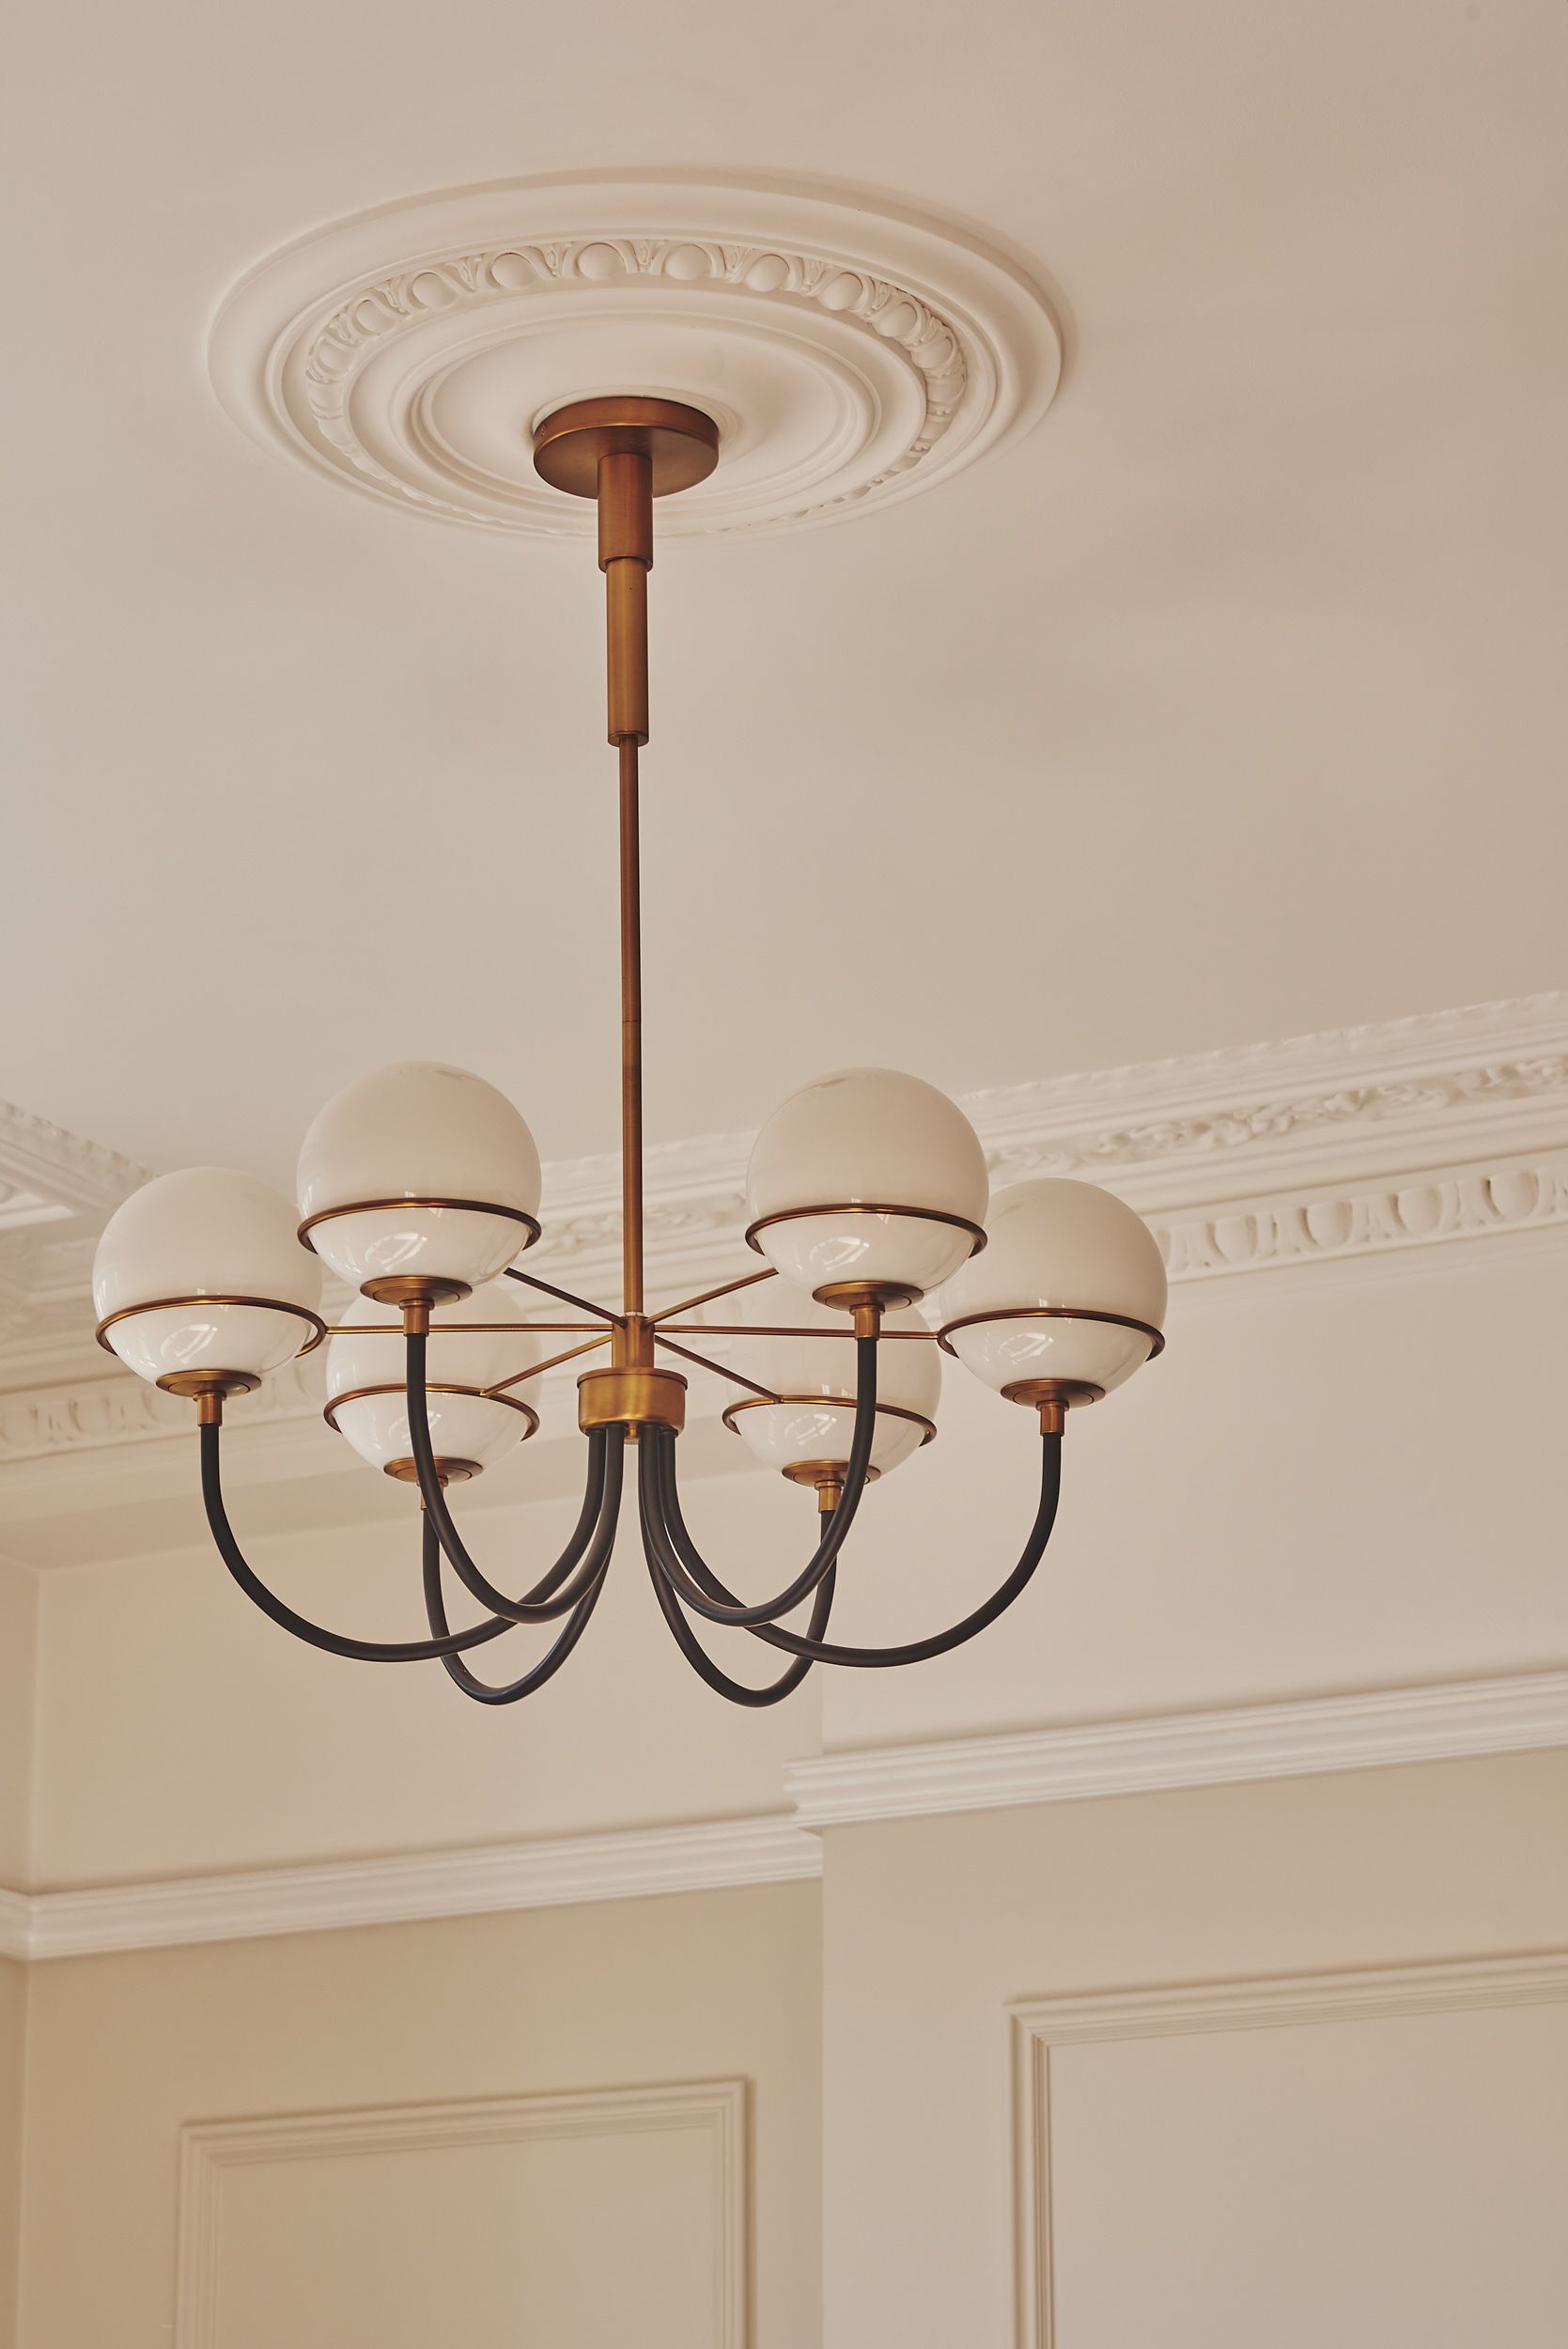 Afordable Traditional Lighting “Illuminate Your Space: Affordable Traditional Lighting Options for Every Style”